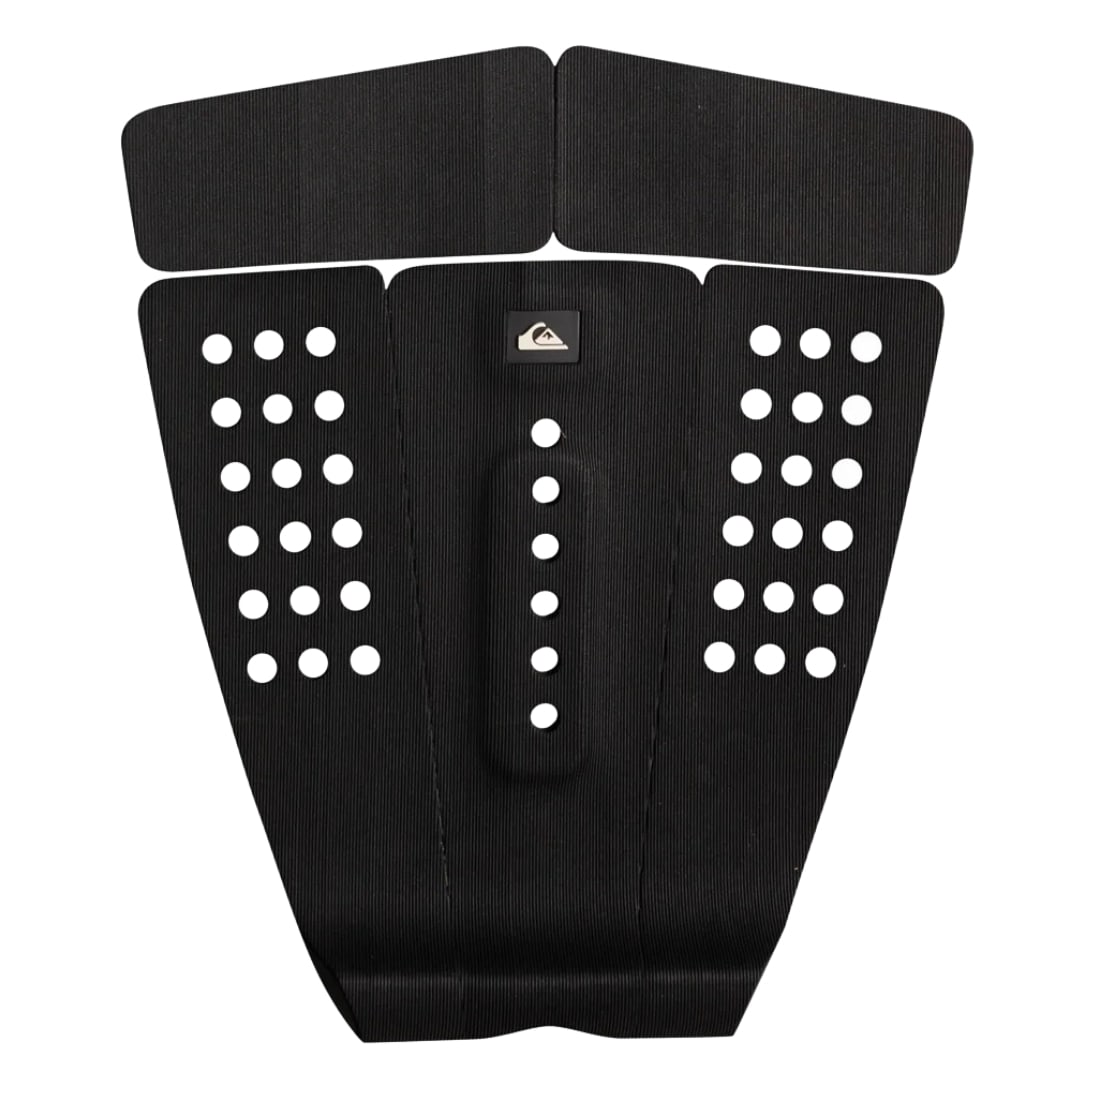 Quiksilver New Wave 2.0 Tail Pad - Black - 5+ Piece Tail Pad by Quiksilver